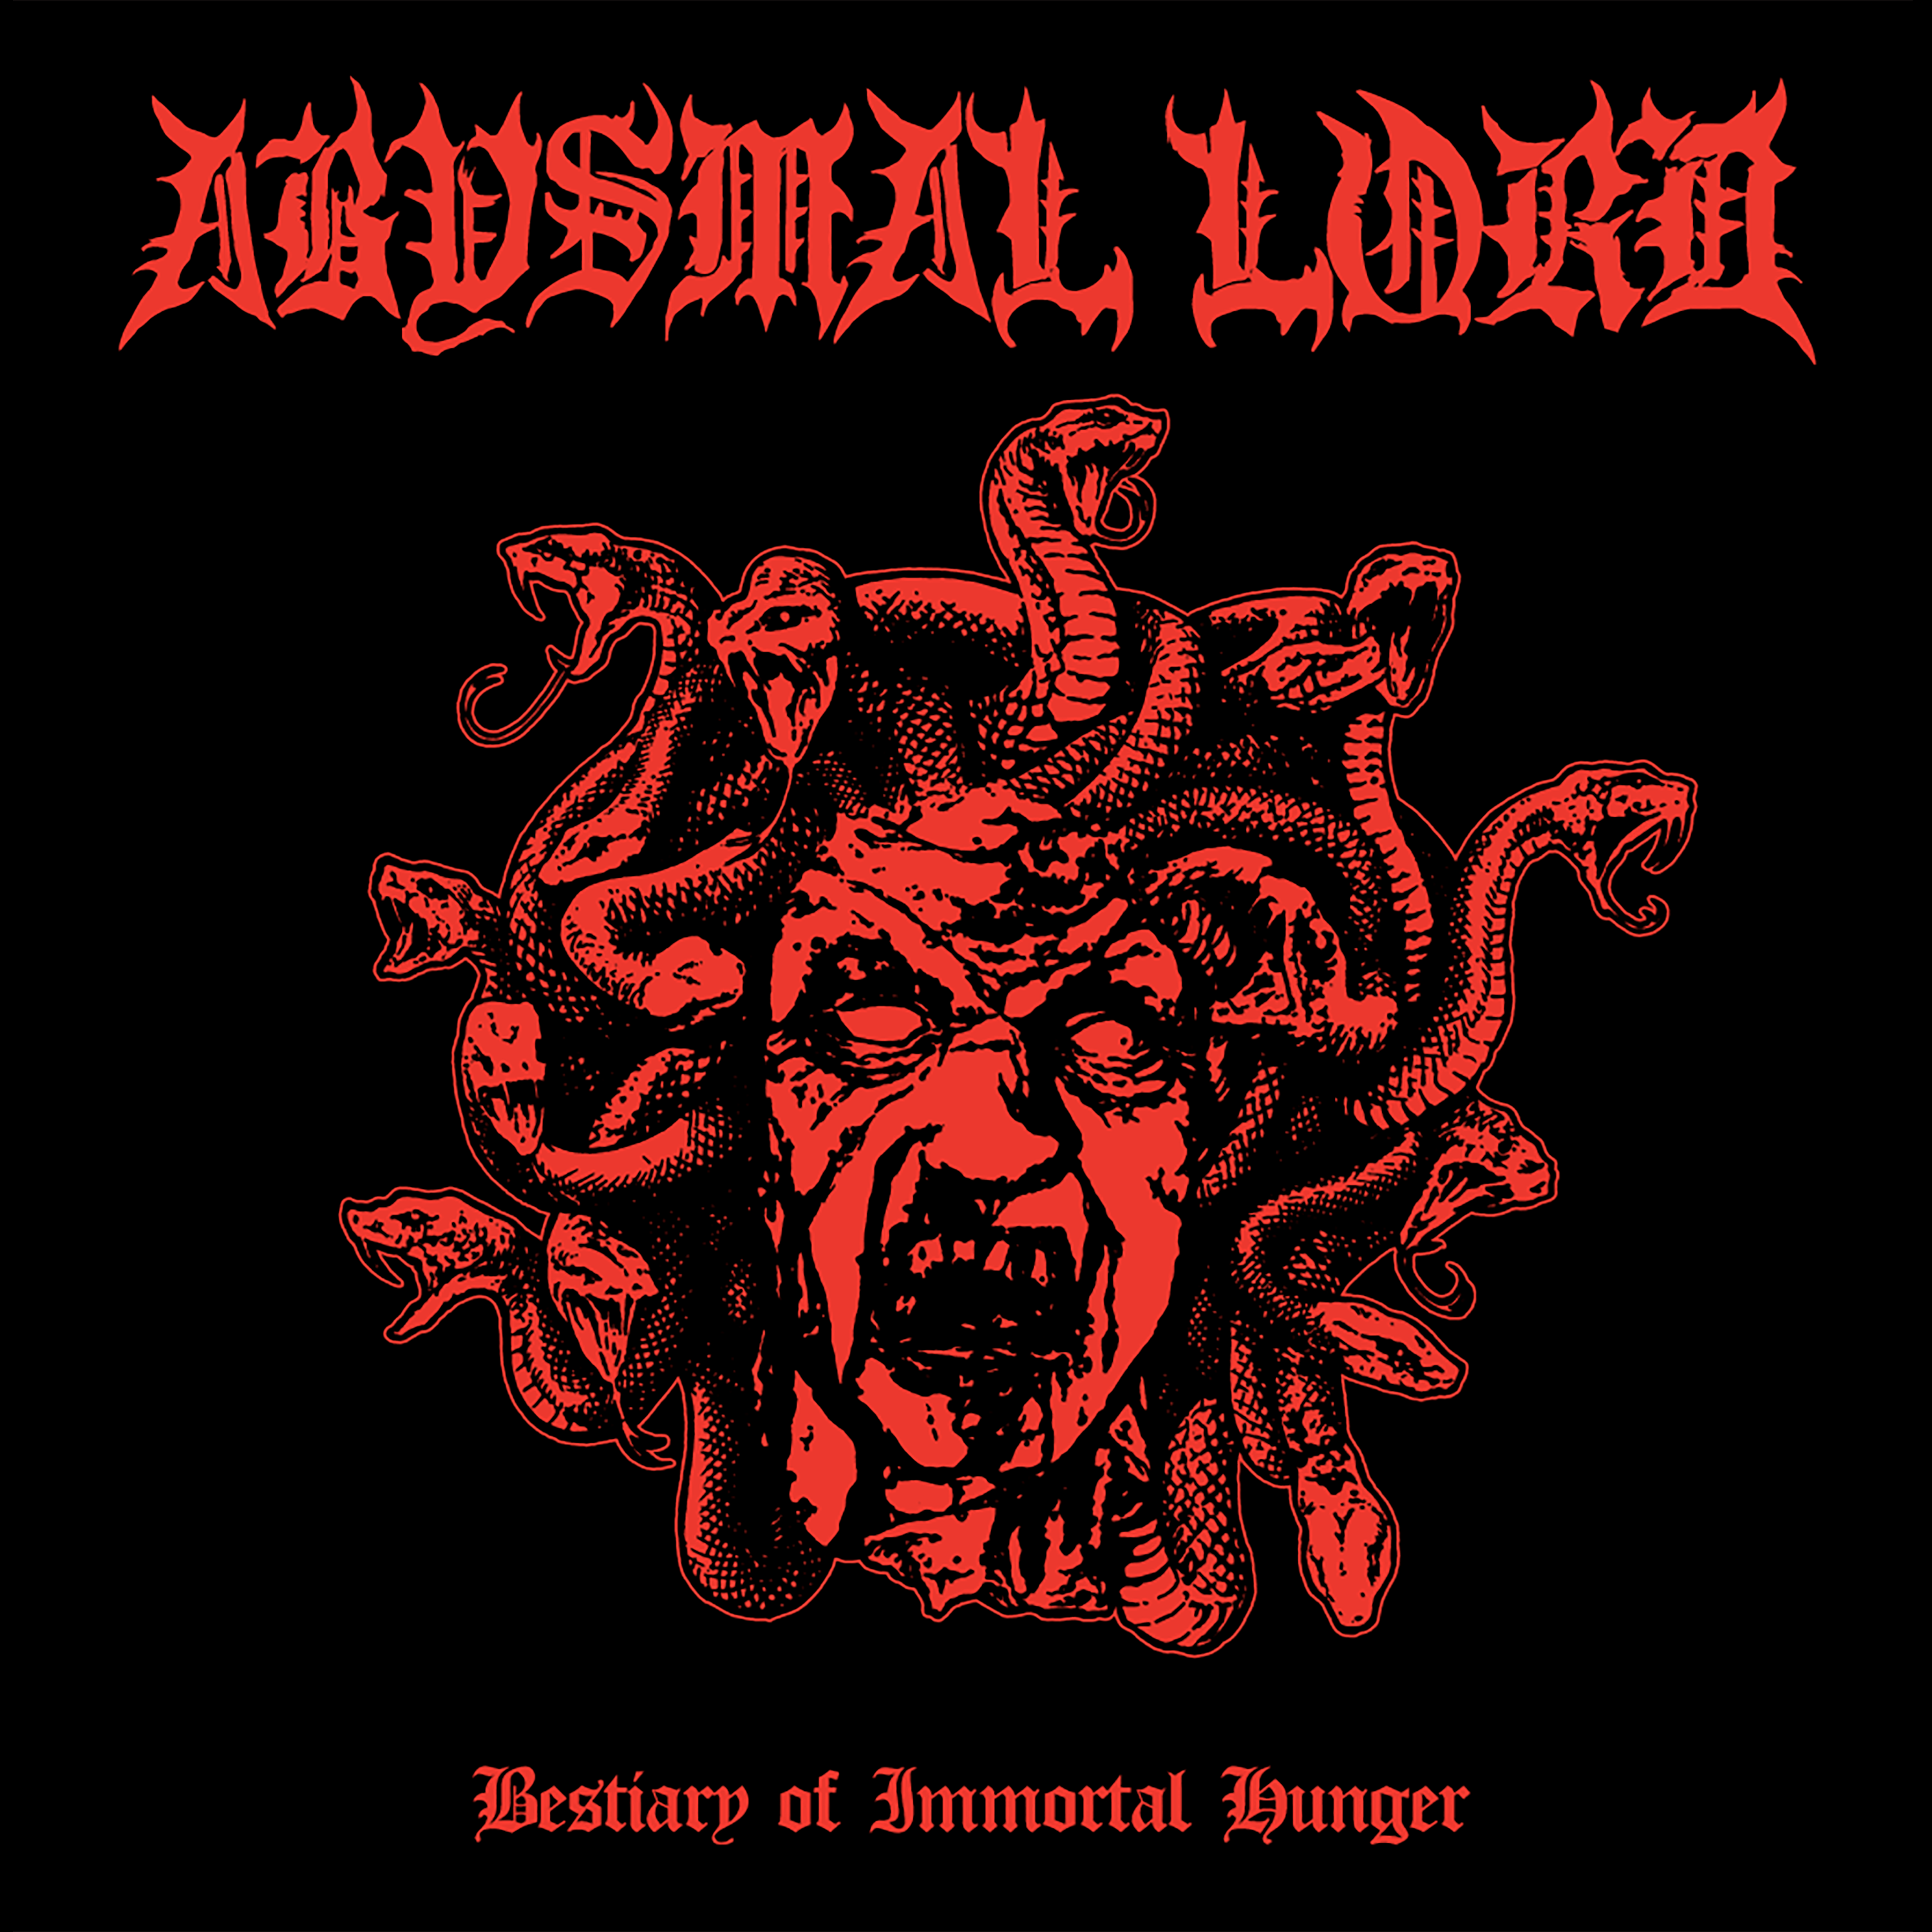 Abysmal Lord - Bestiary of Immortal Hunger (2022) 24bit FLAC Download